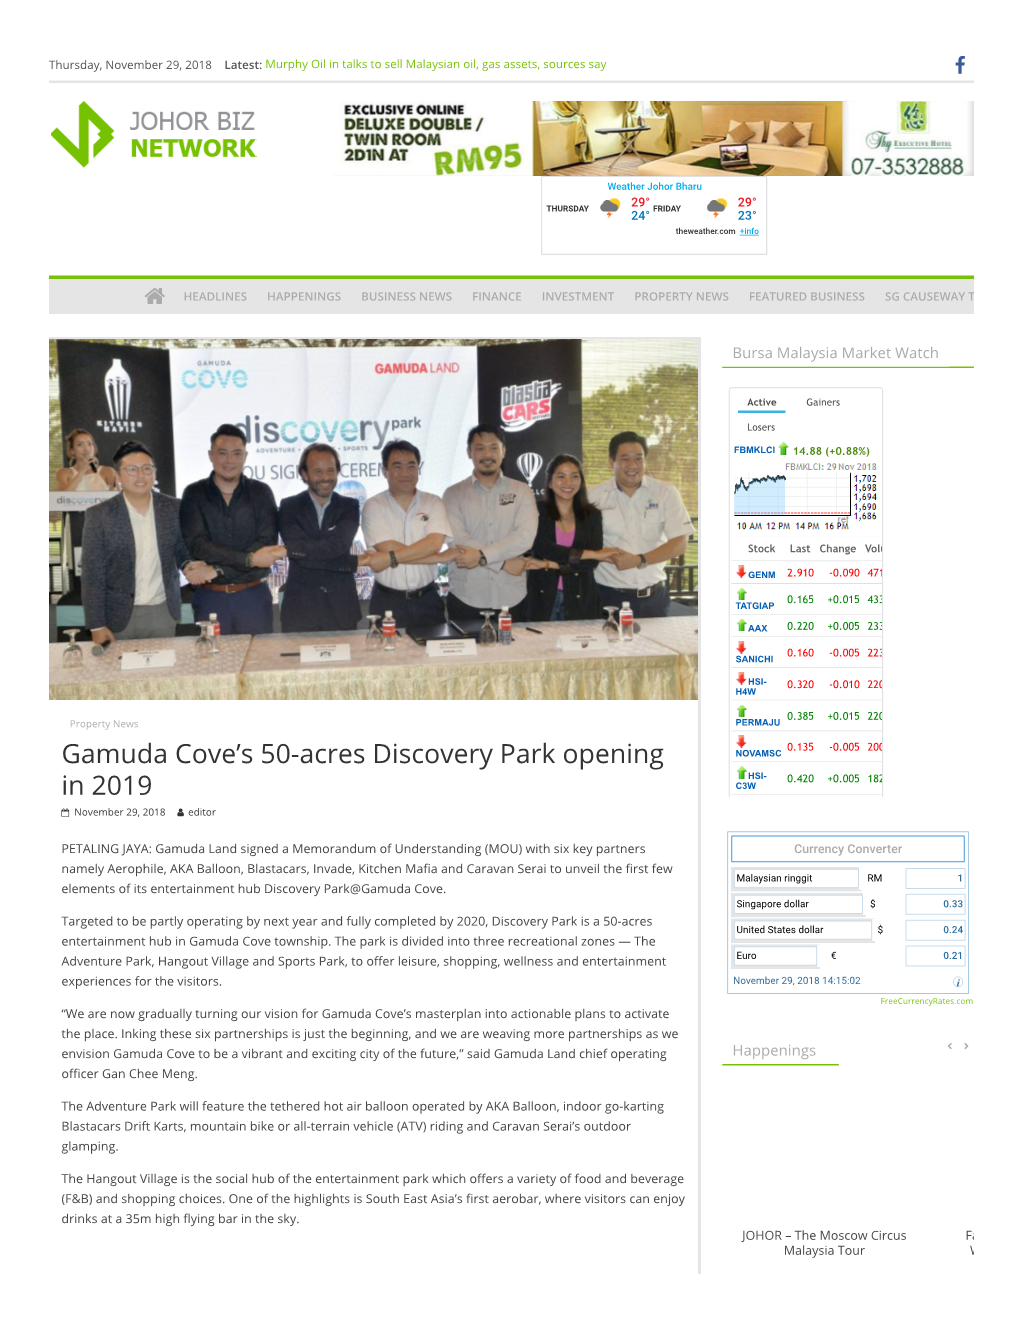 Gamuda Cove's 50-Acres Discovery Park Opening in 2019